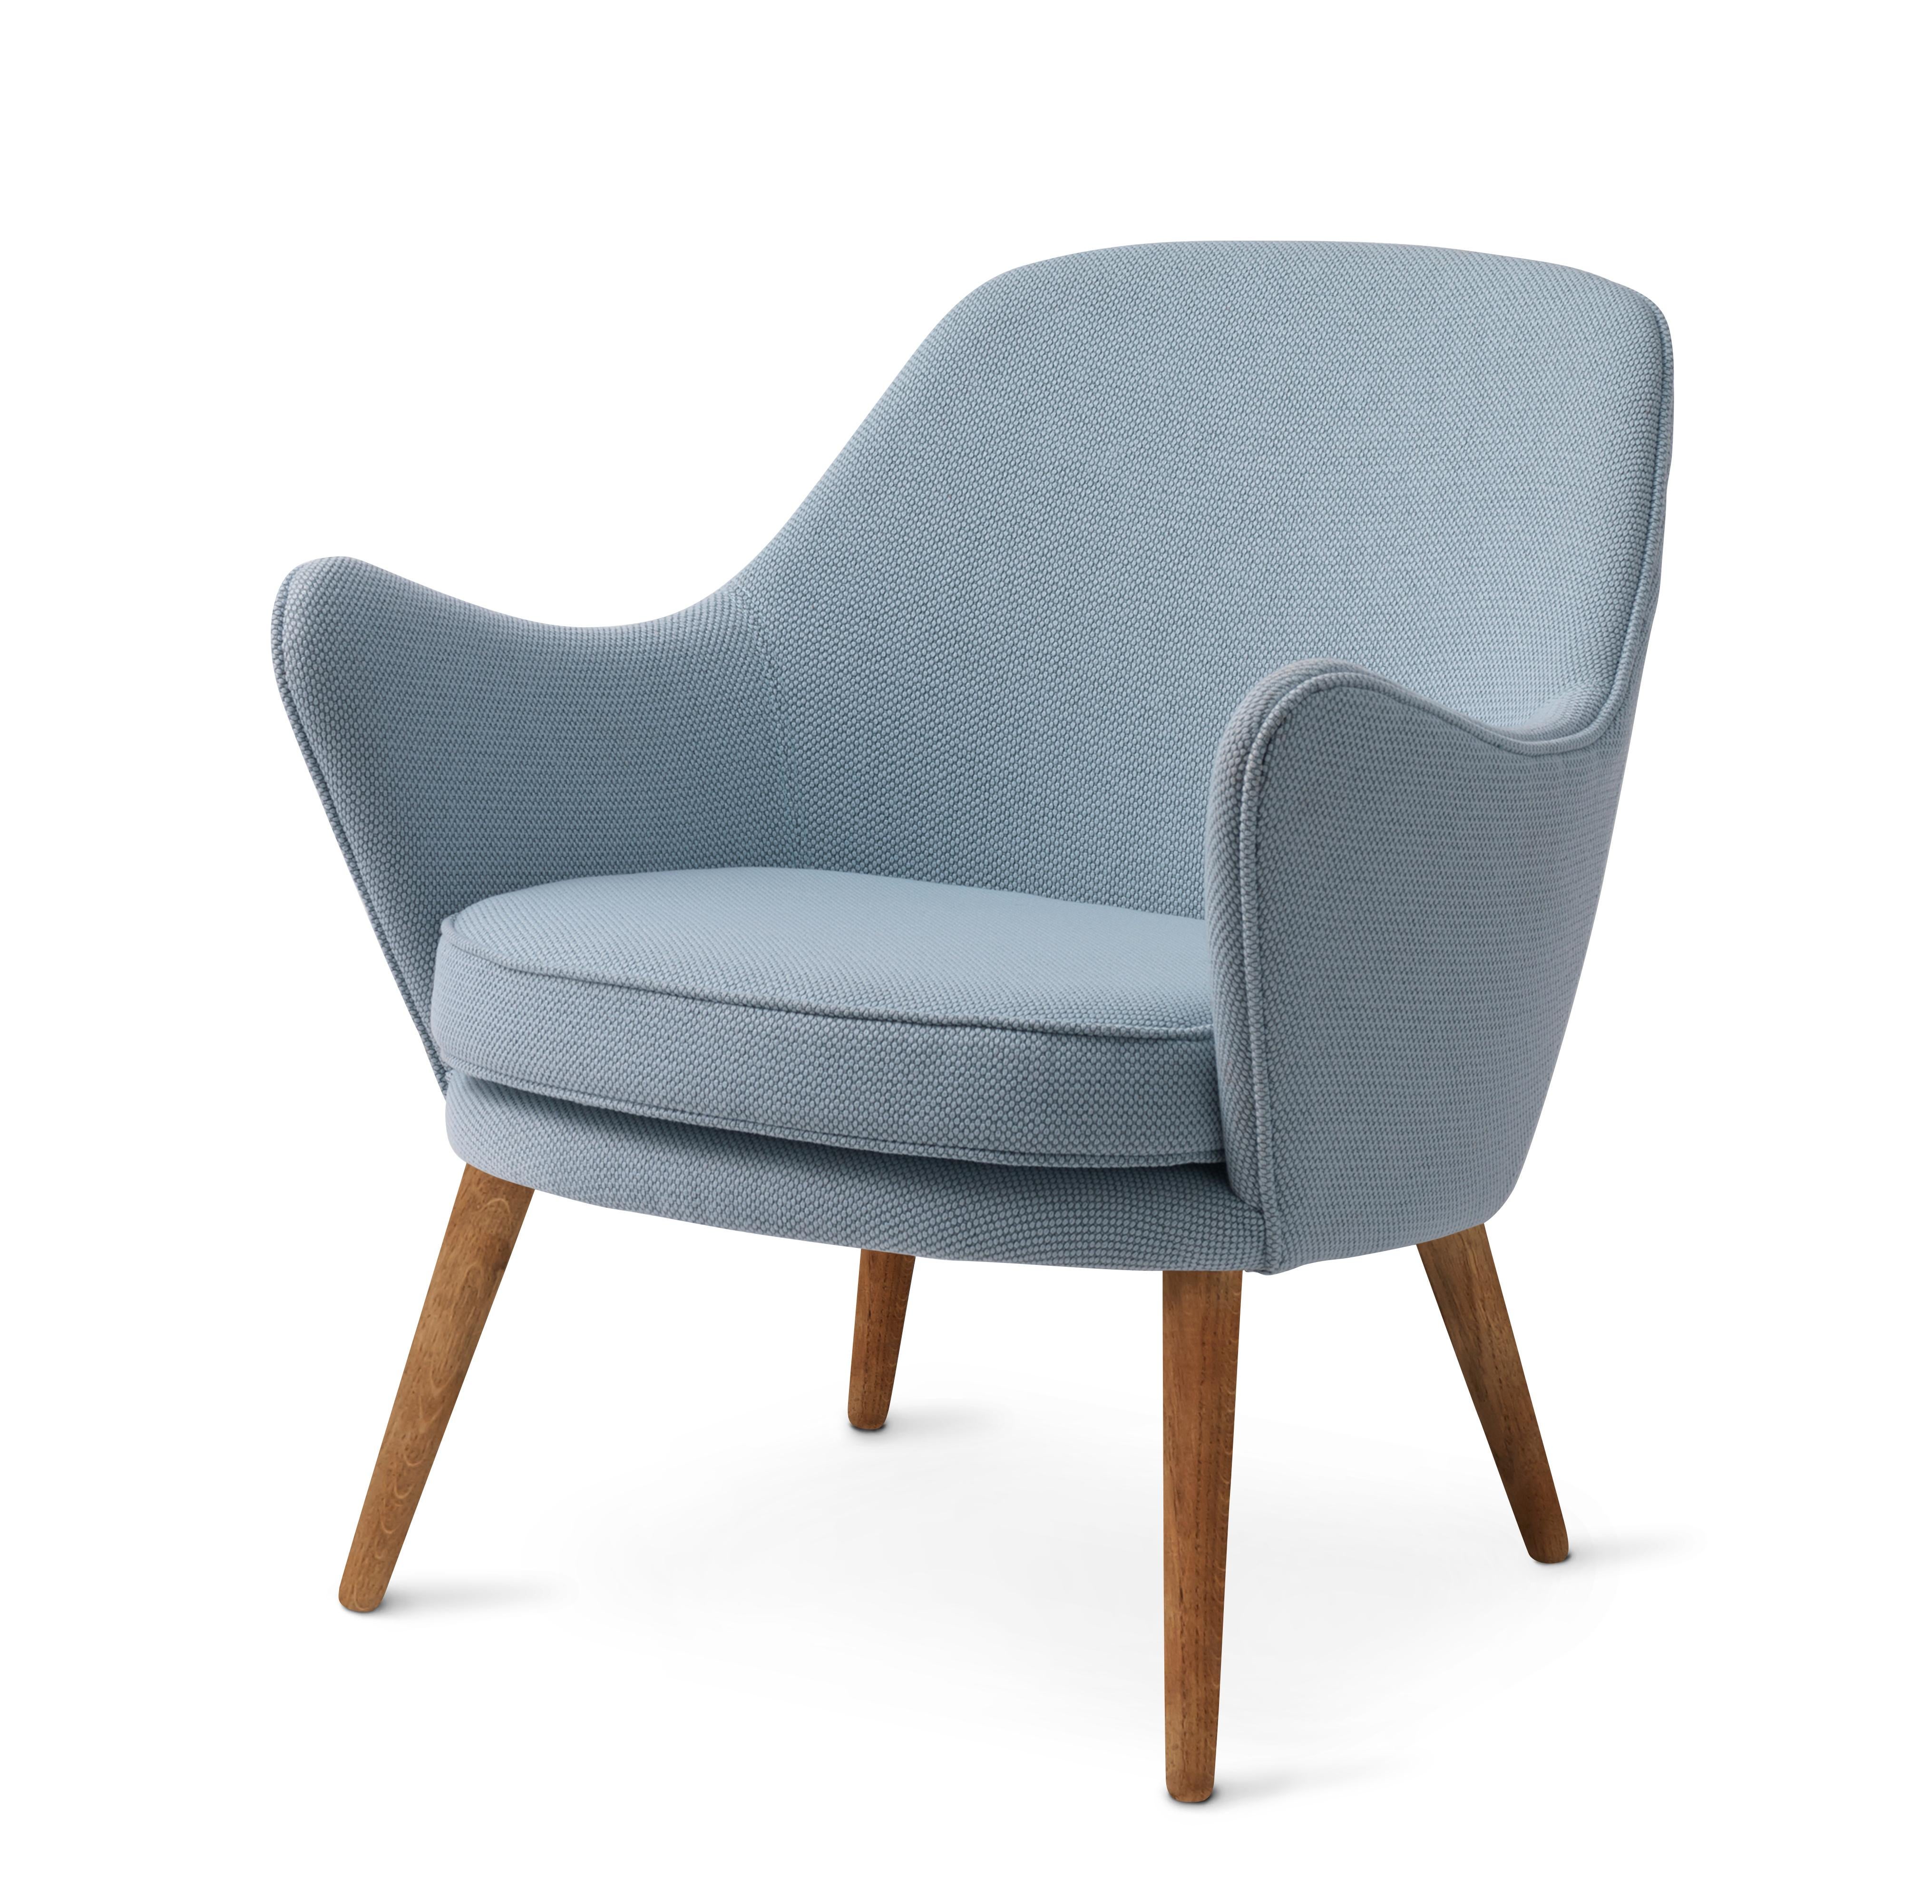 For Sale: Gray (Merit014/Merit014) Dwell Lounge Chair, by Hans Olsen from Warm Nordic 2